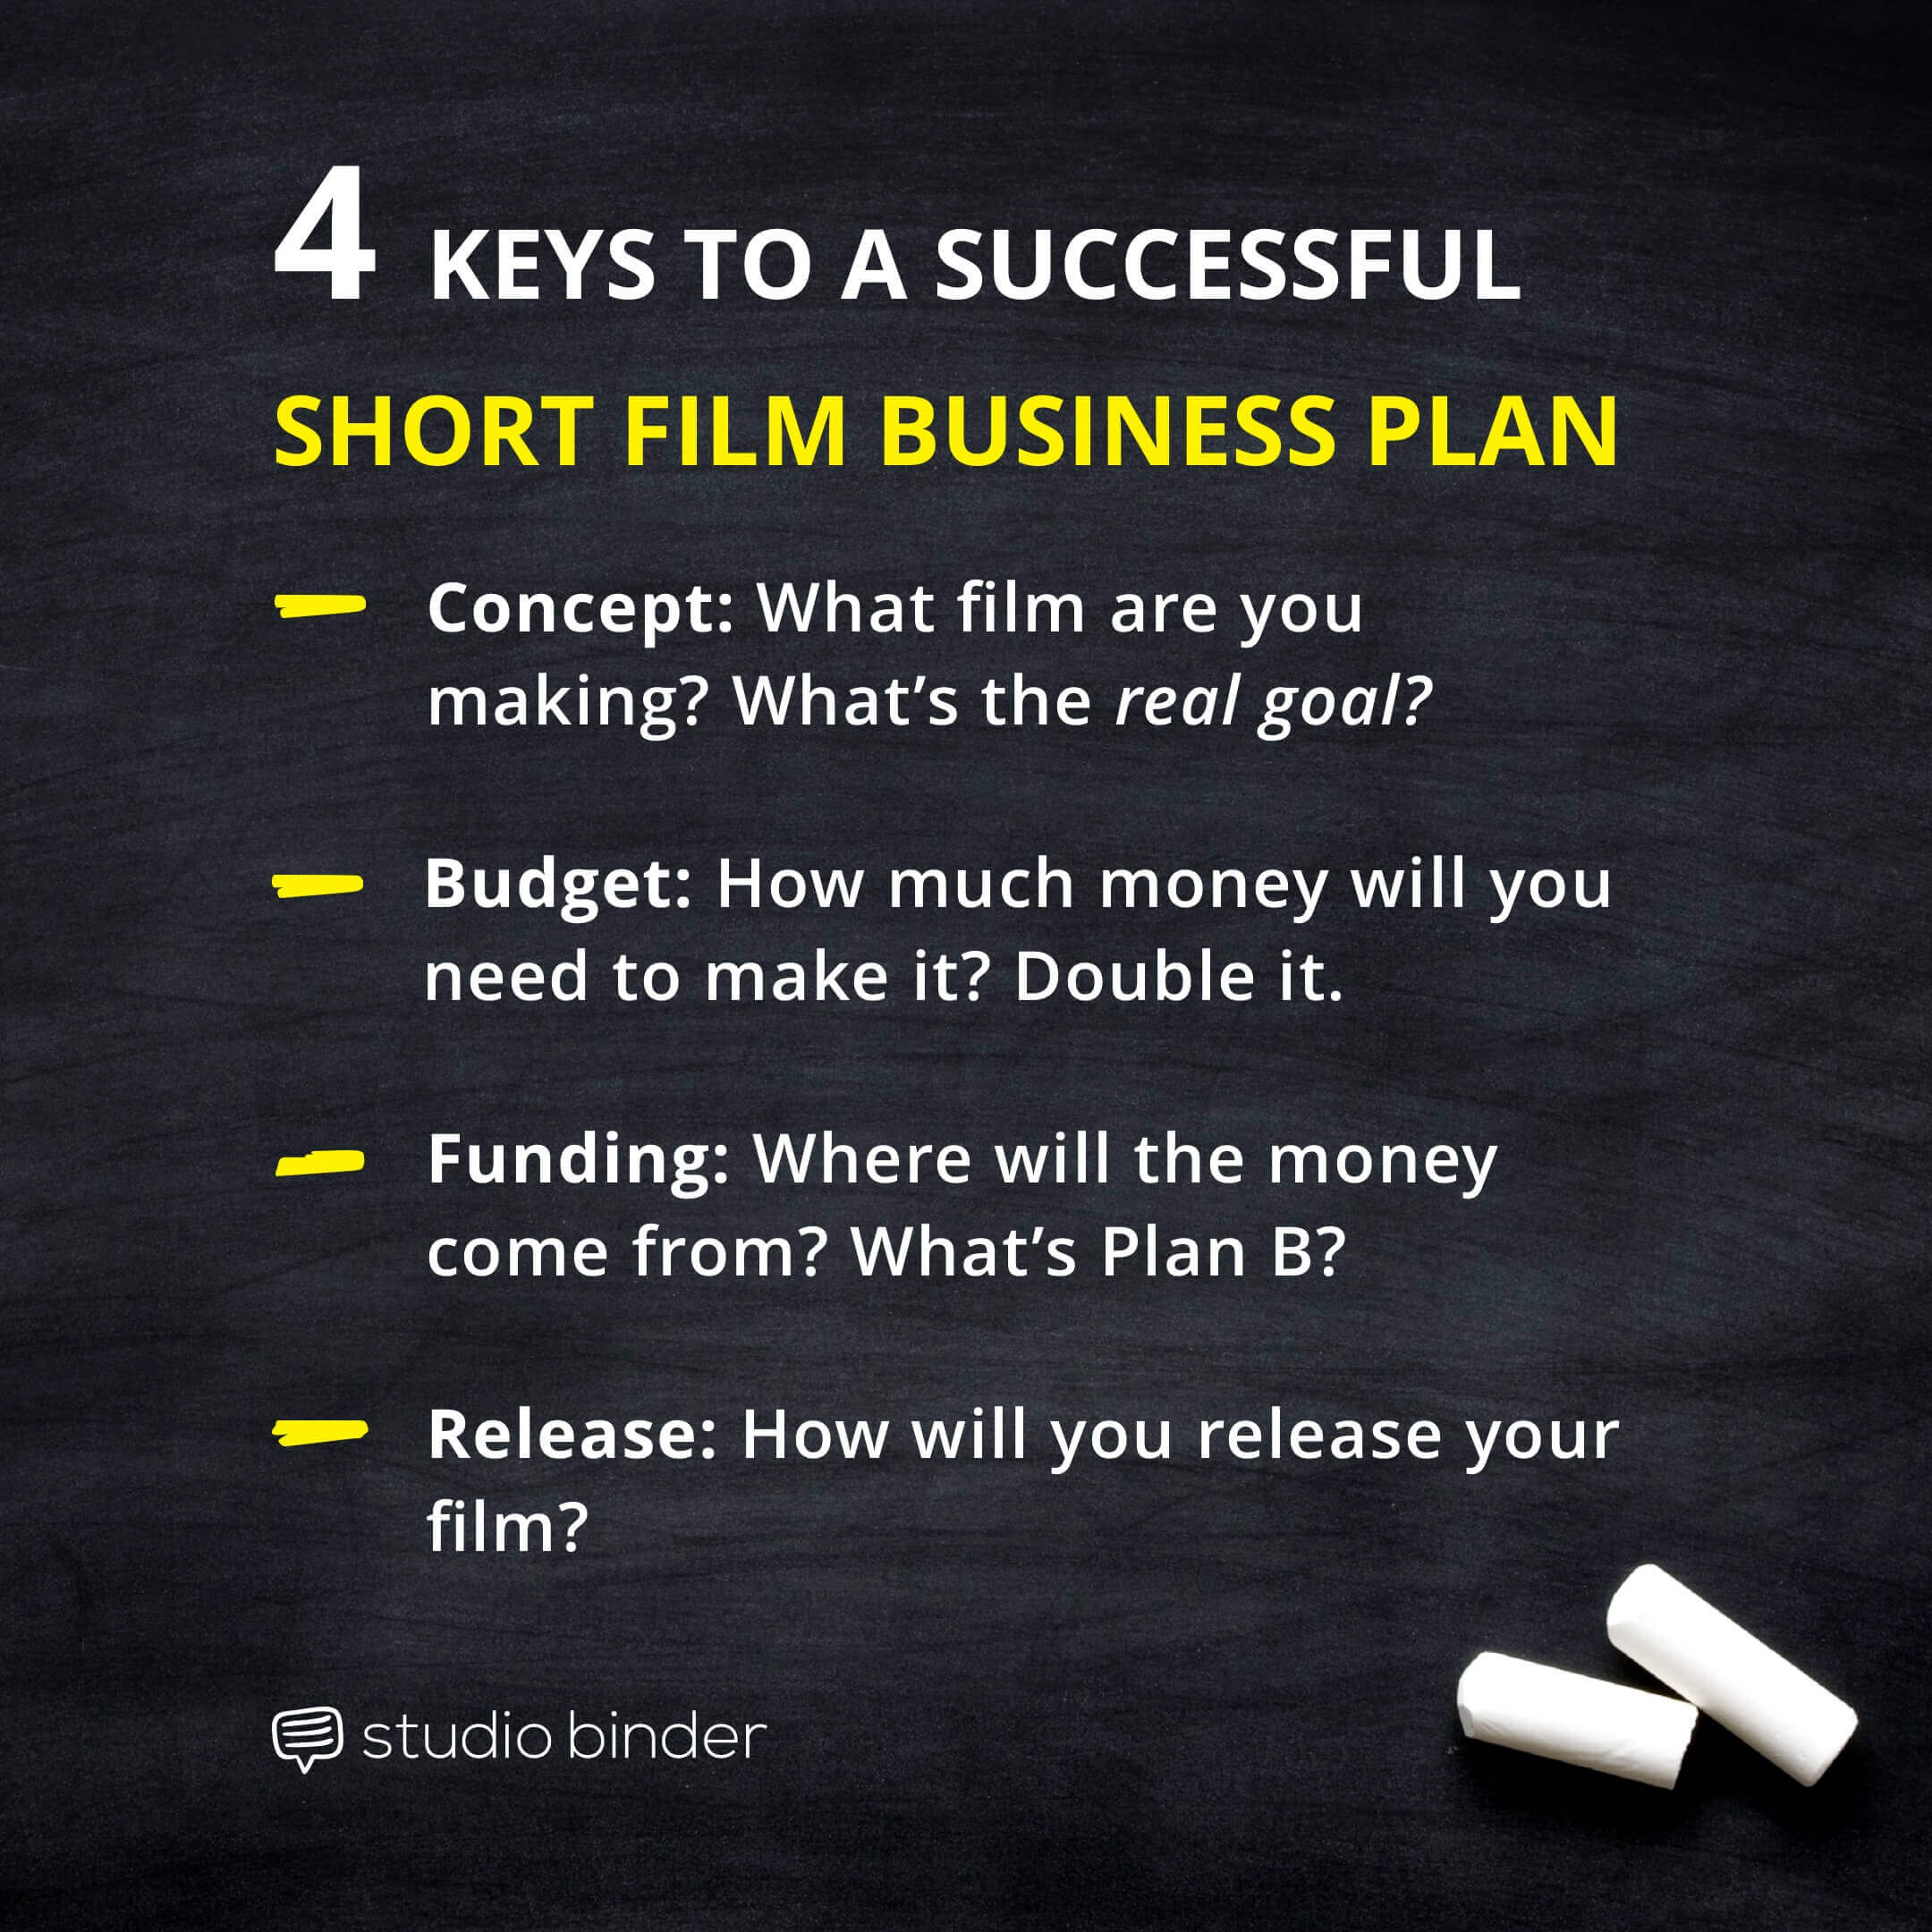 film production house business plan